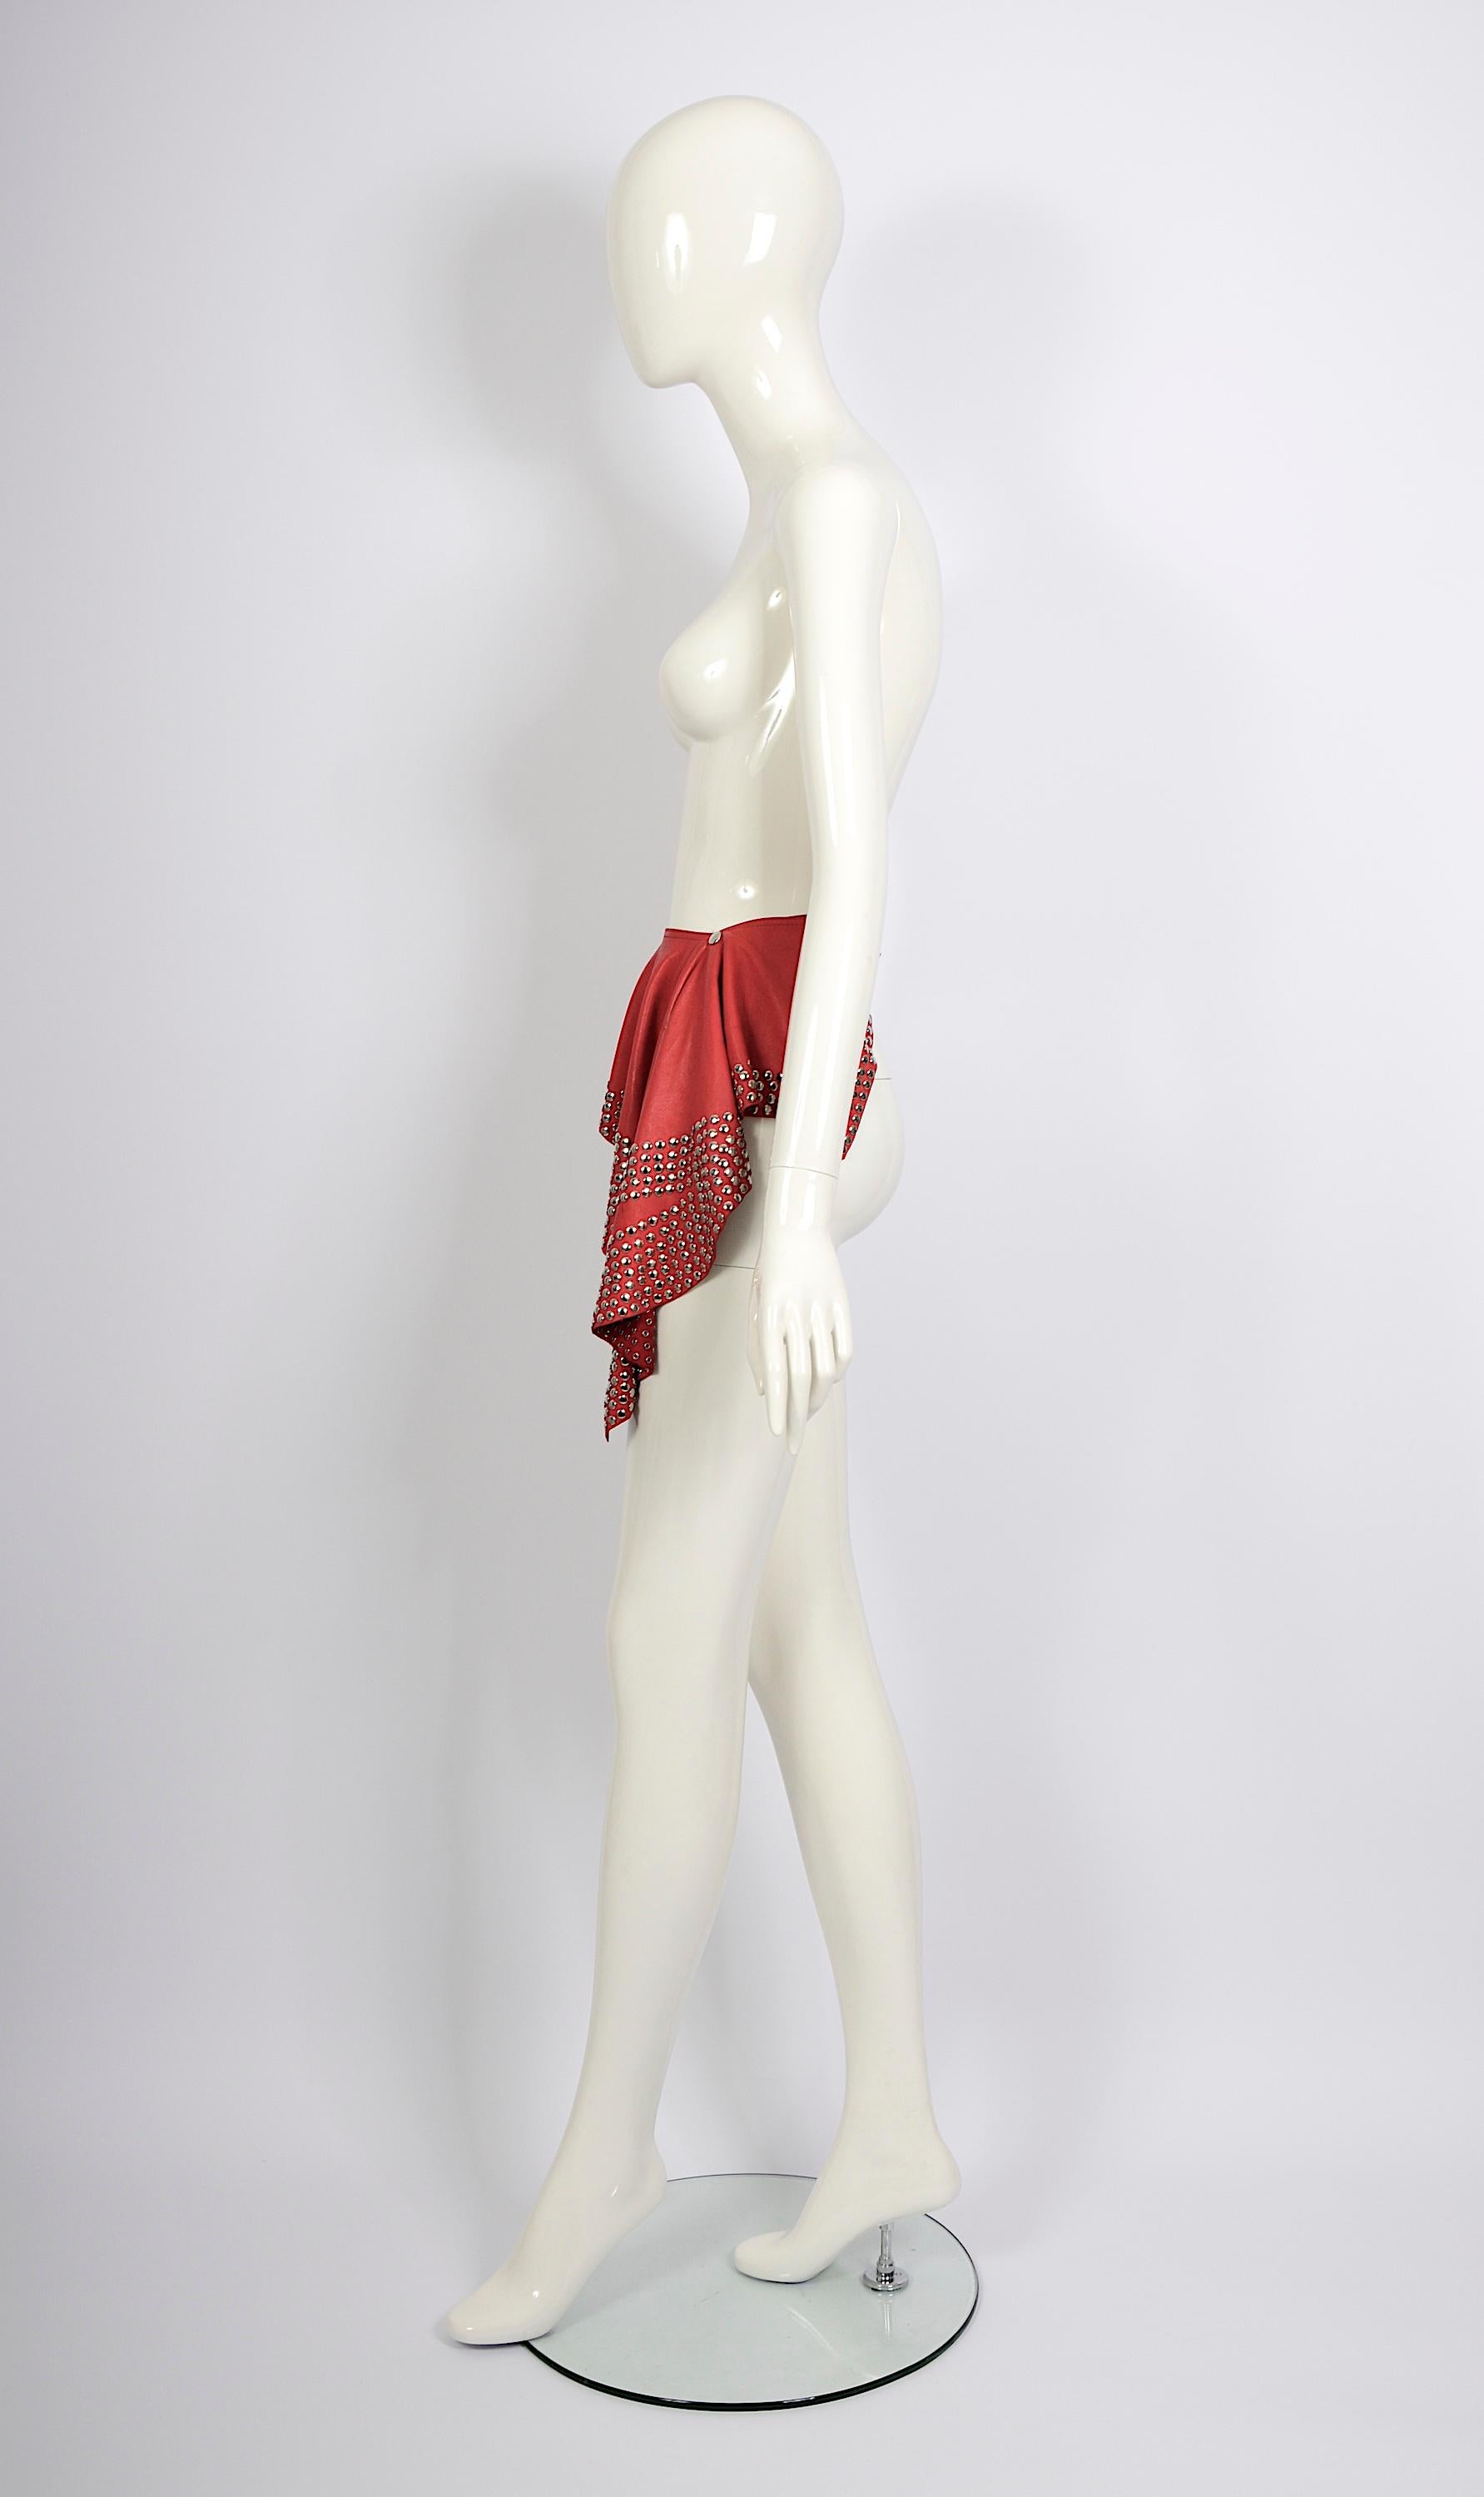 Azzedine Alaia circa 1981 collectionneurs Studded embellished red leather belt skirt en vente 6